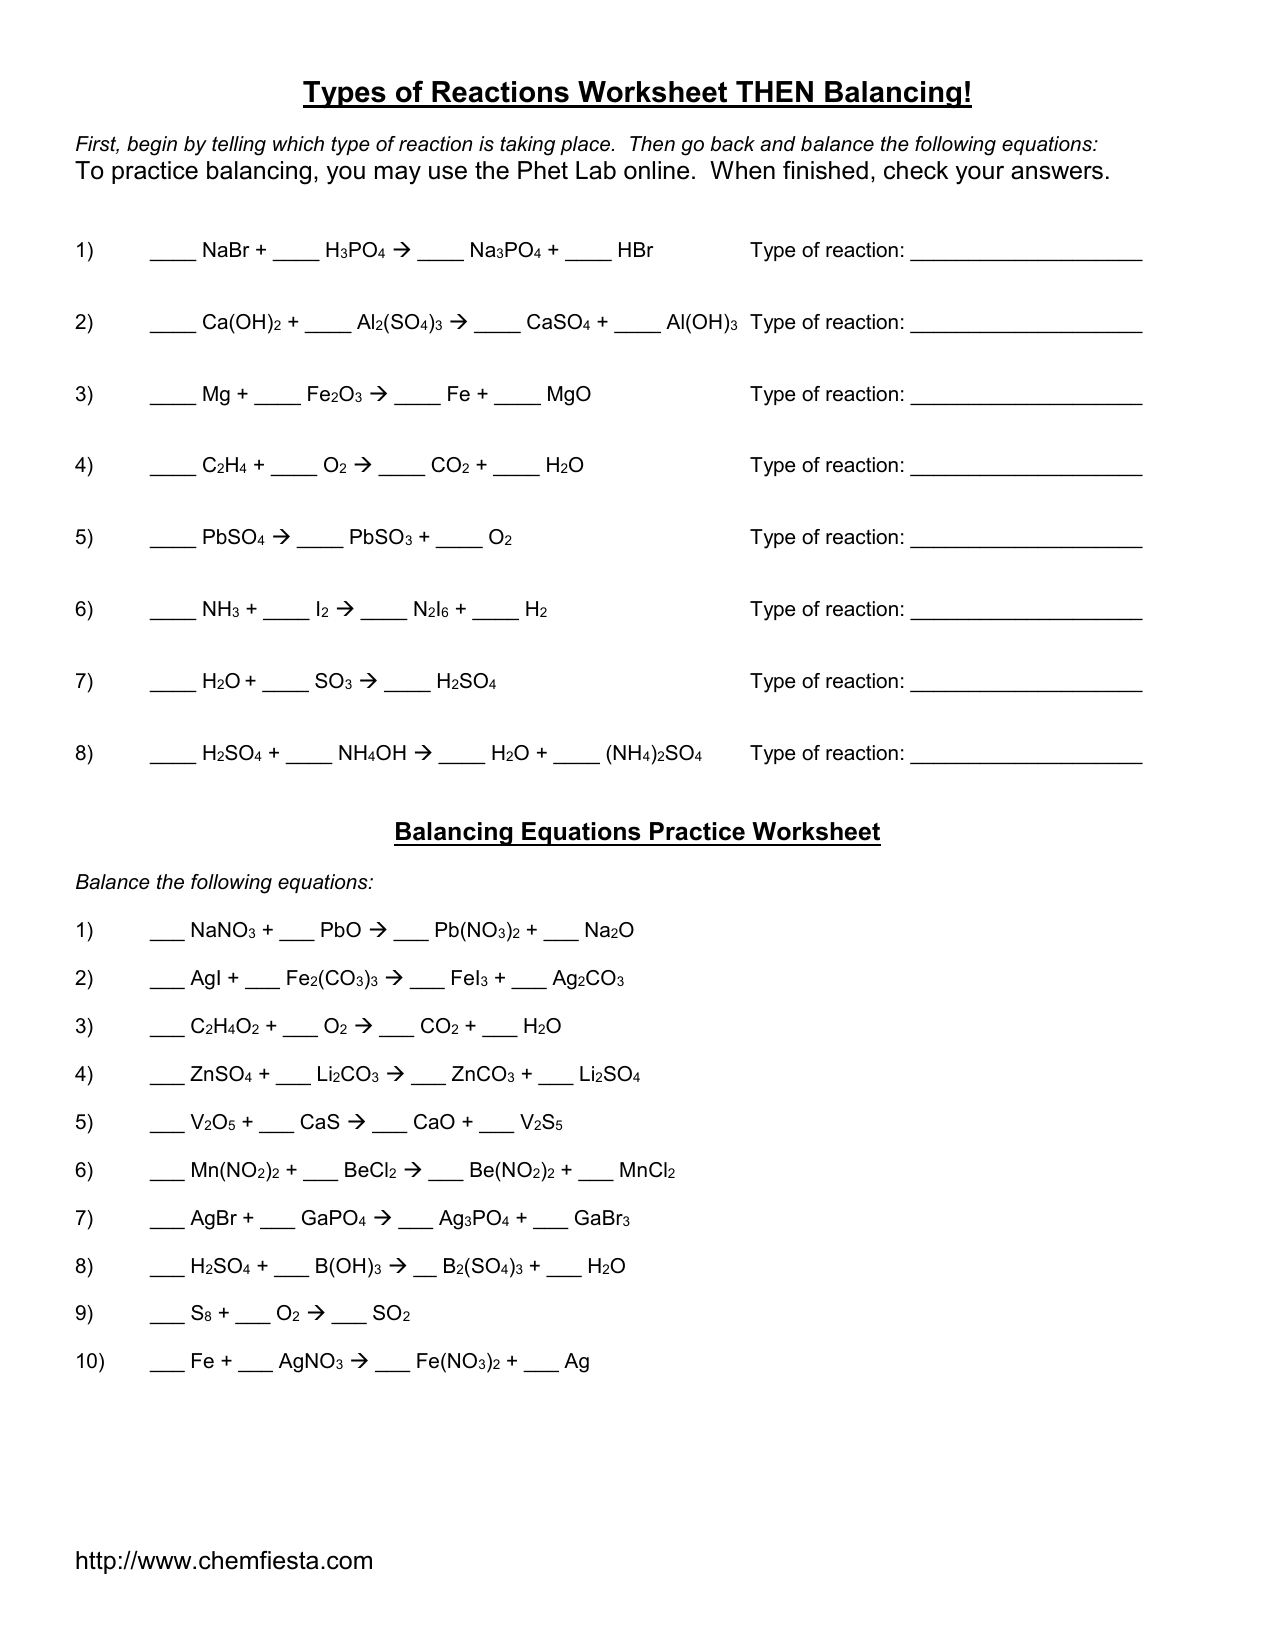 Balancing Equations Practice Worksheet With Balancing Equation Worksheet With Answers